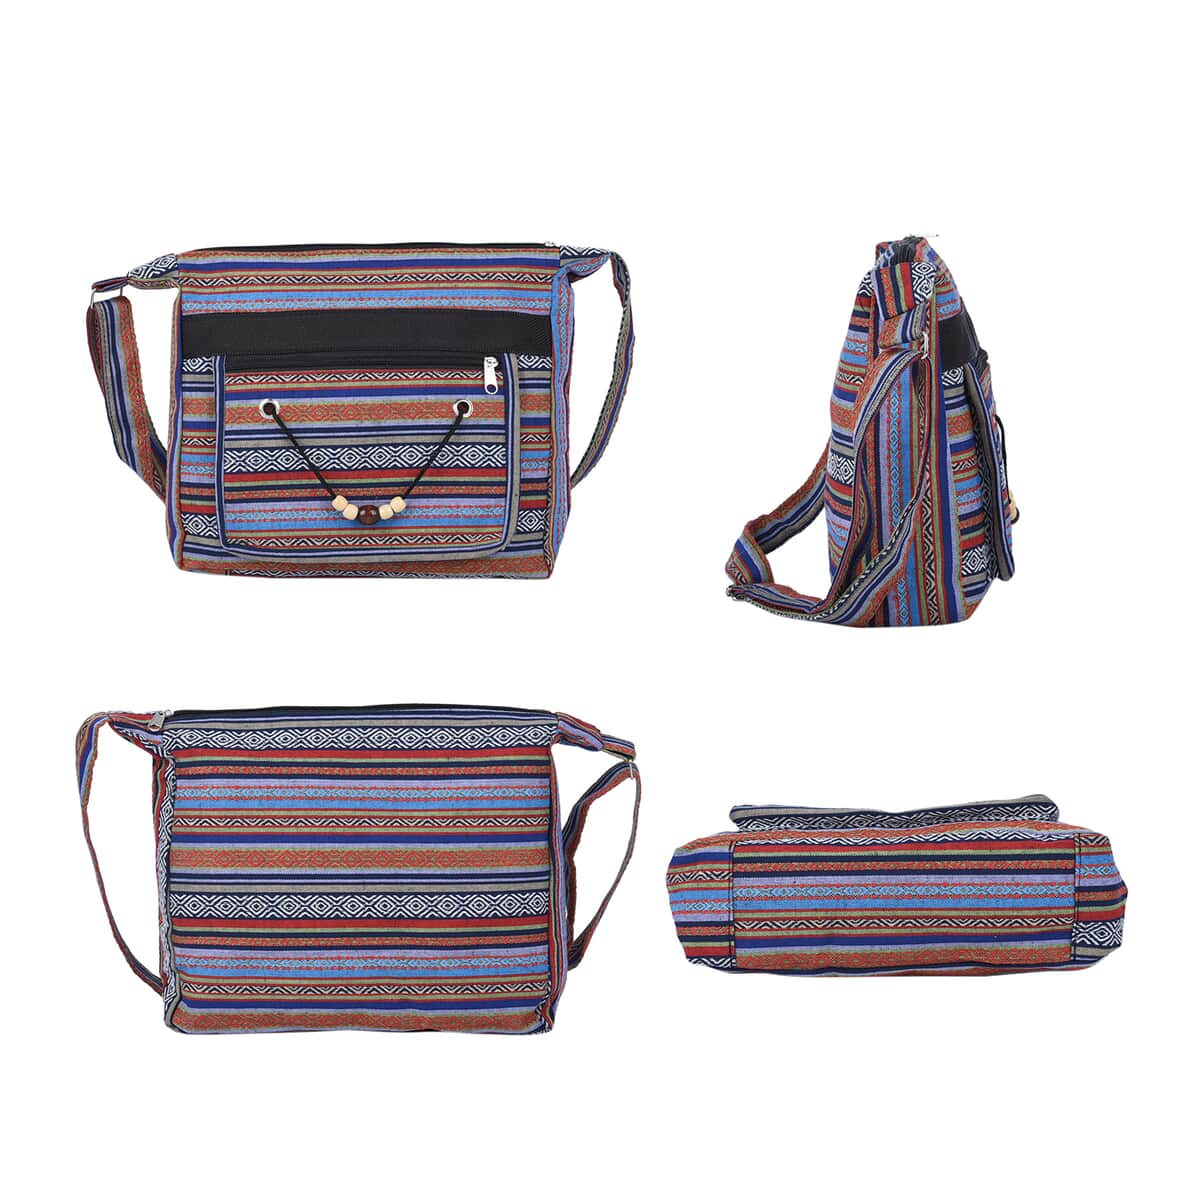 Multi Blue Tribal Pattern 65% Polyester and 35% Cotton Crossbody Bag (12"x3.5"x10") with Shoulder Strap (47") image number 3